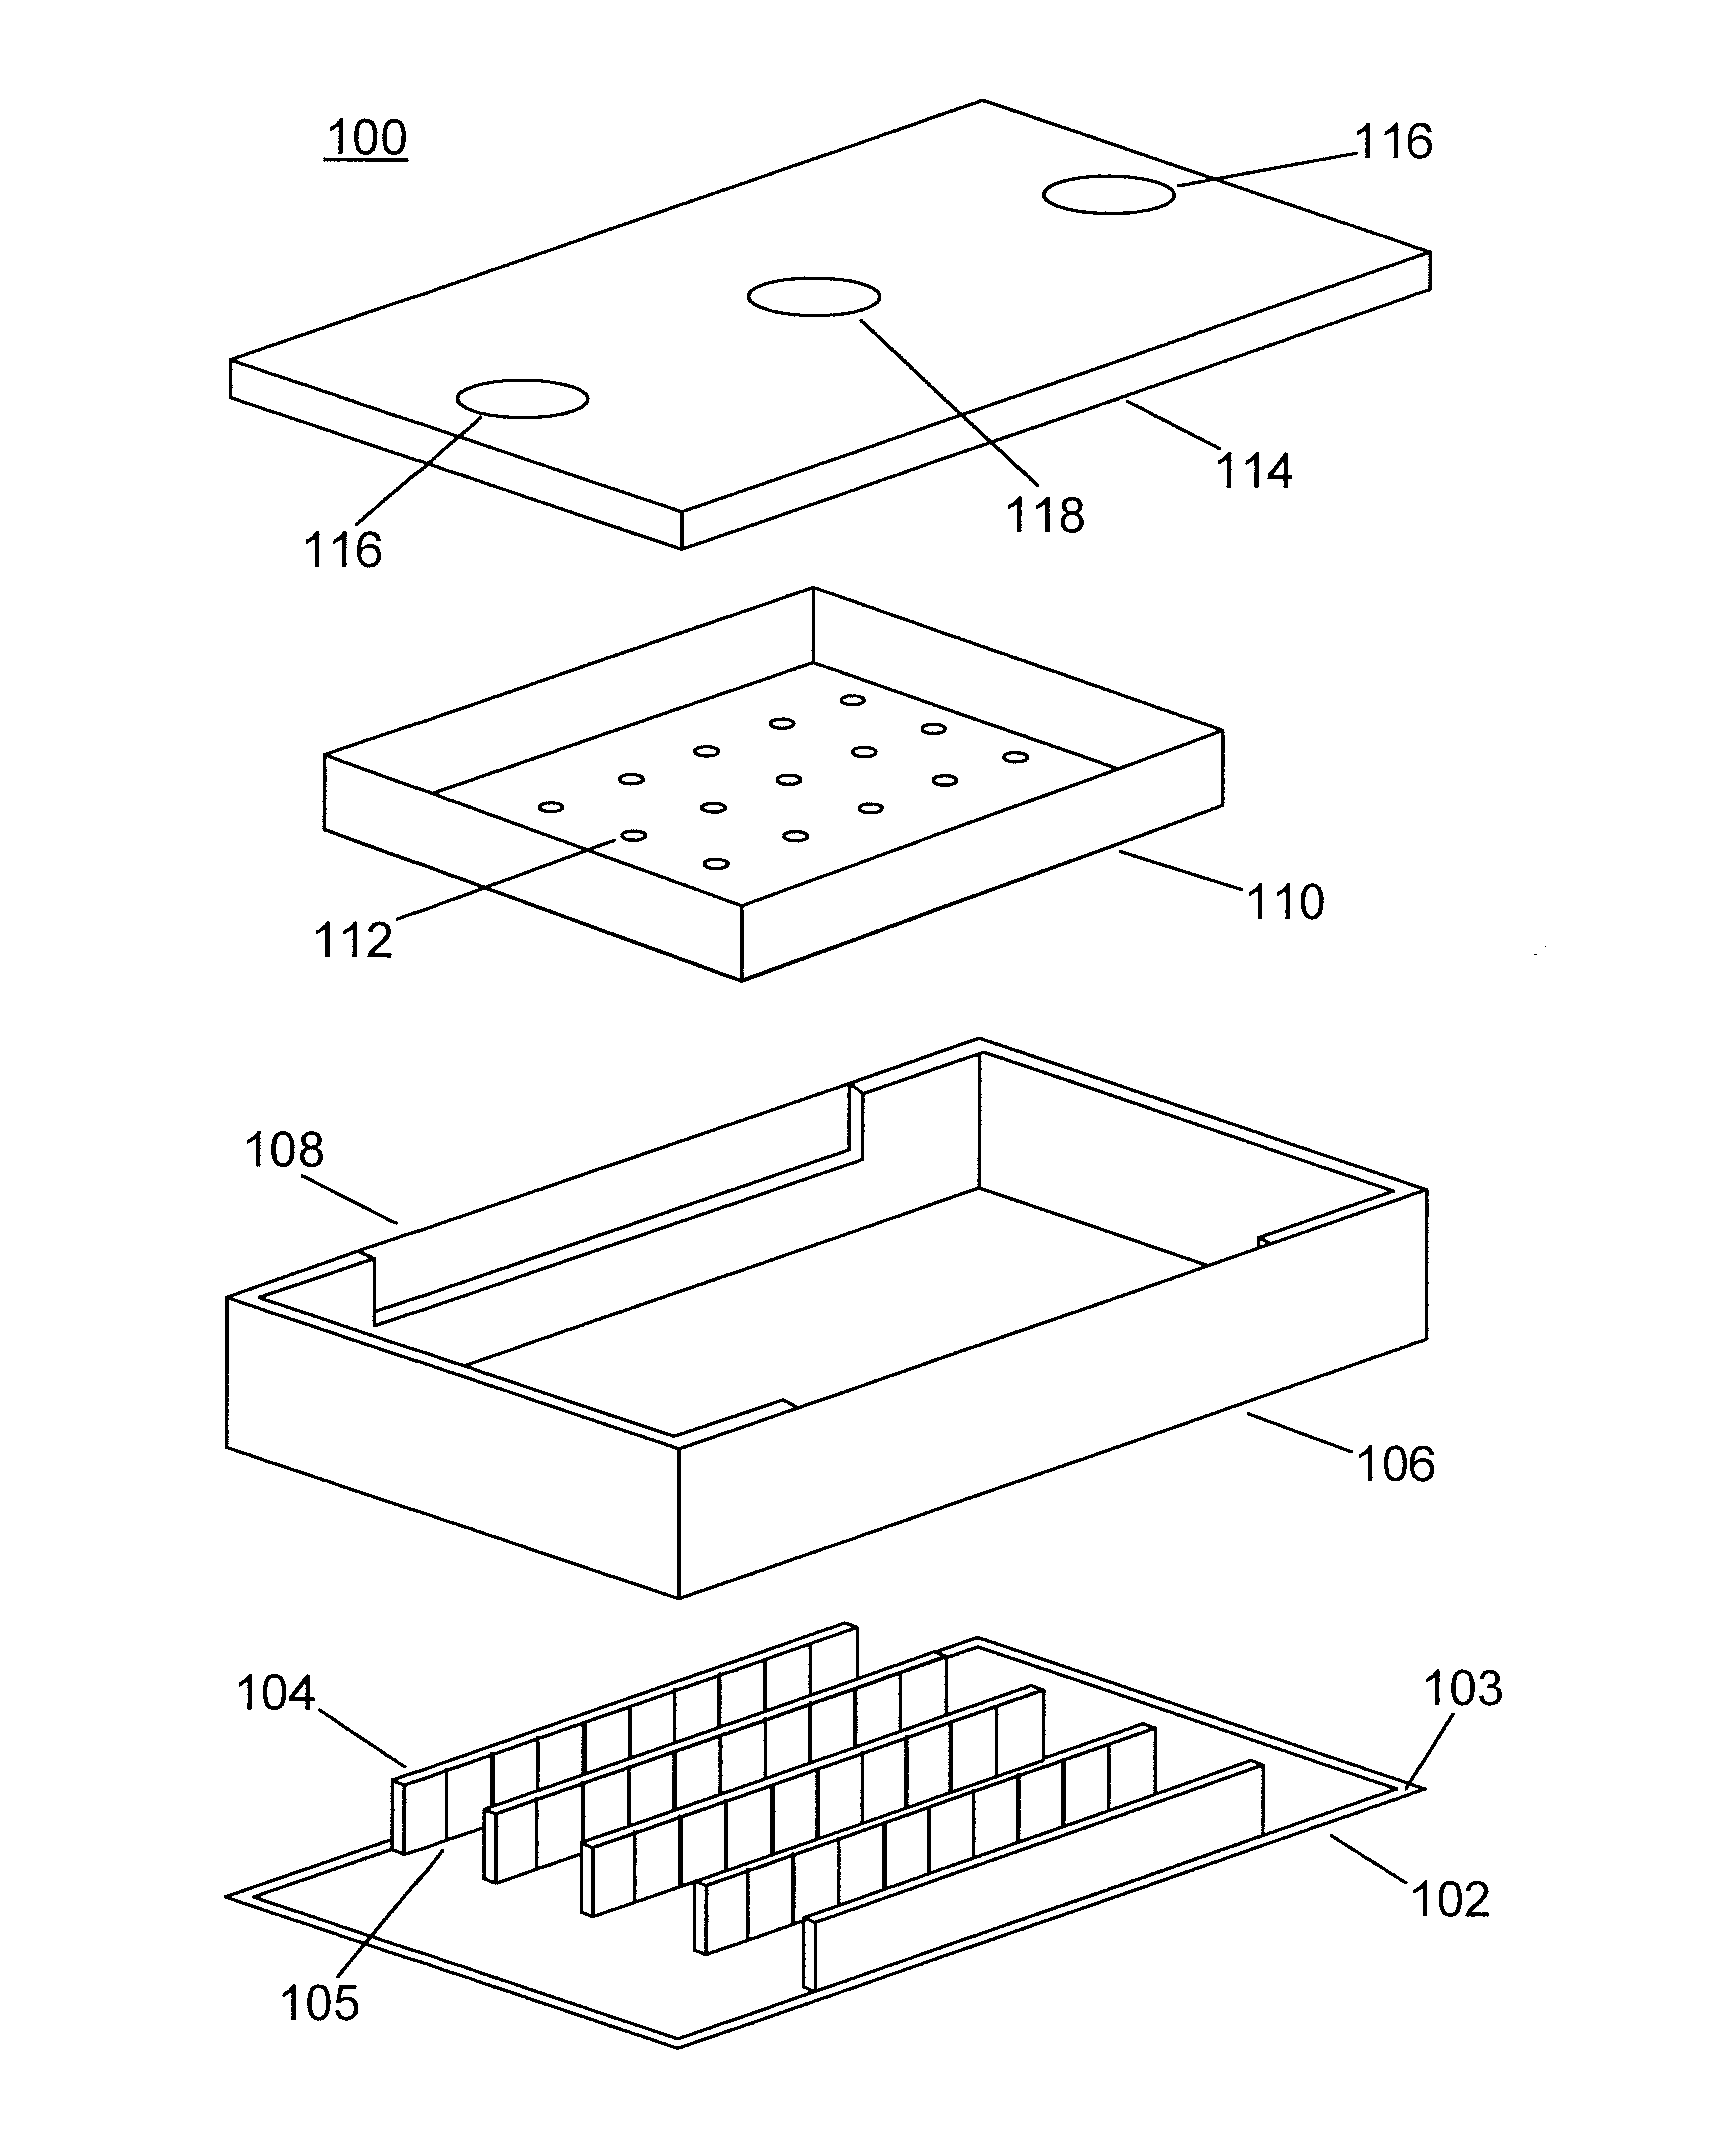 Cold plate with combined inclined impingement and ribbed channels